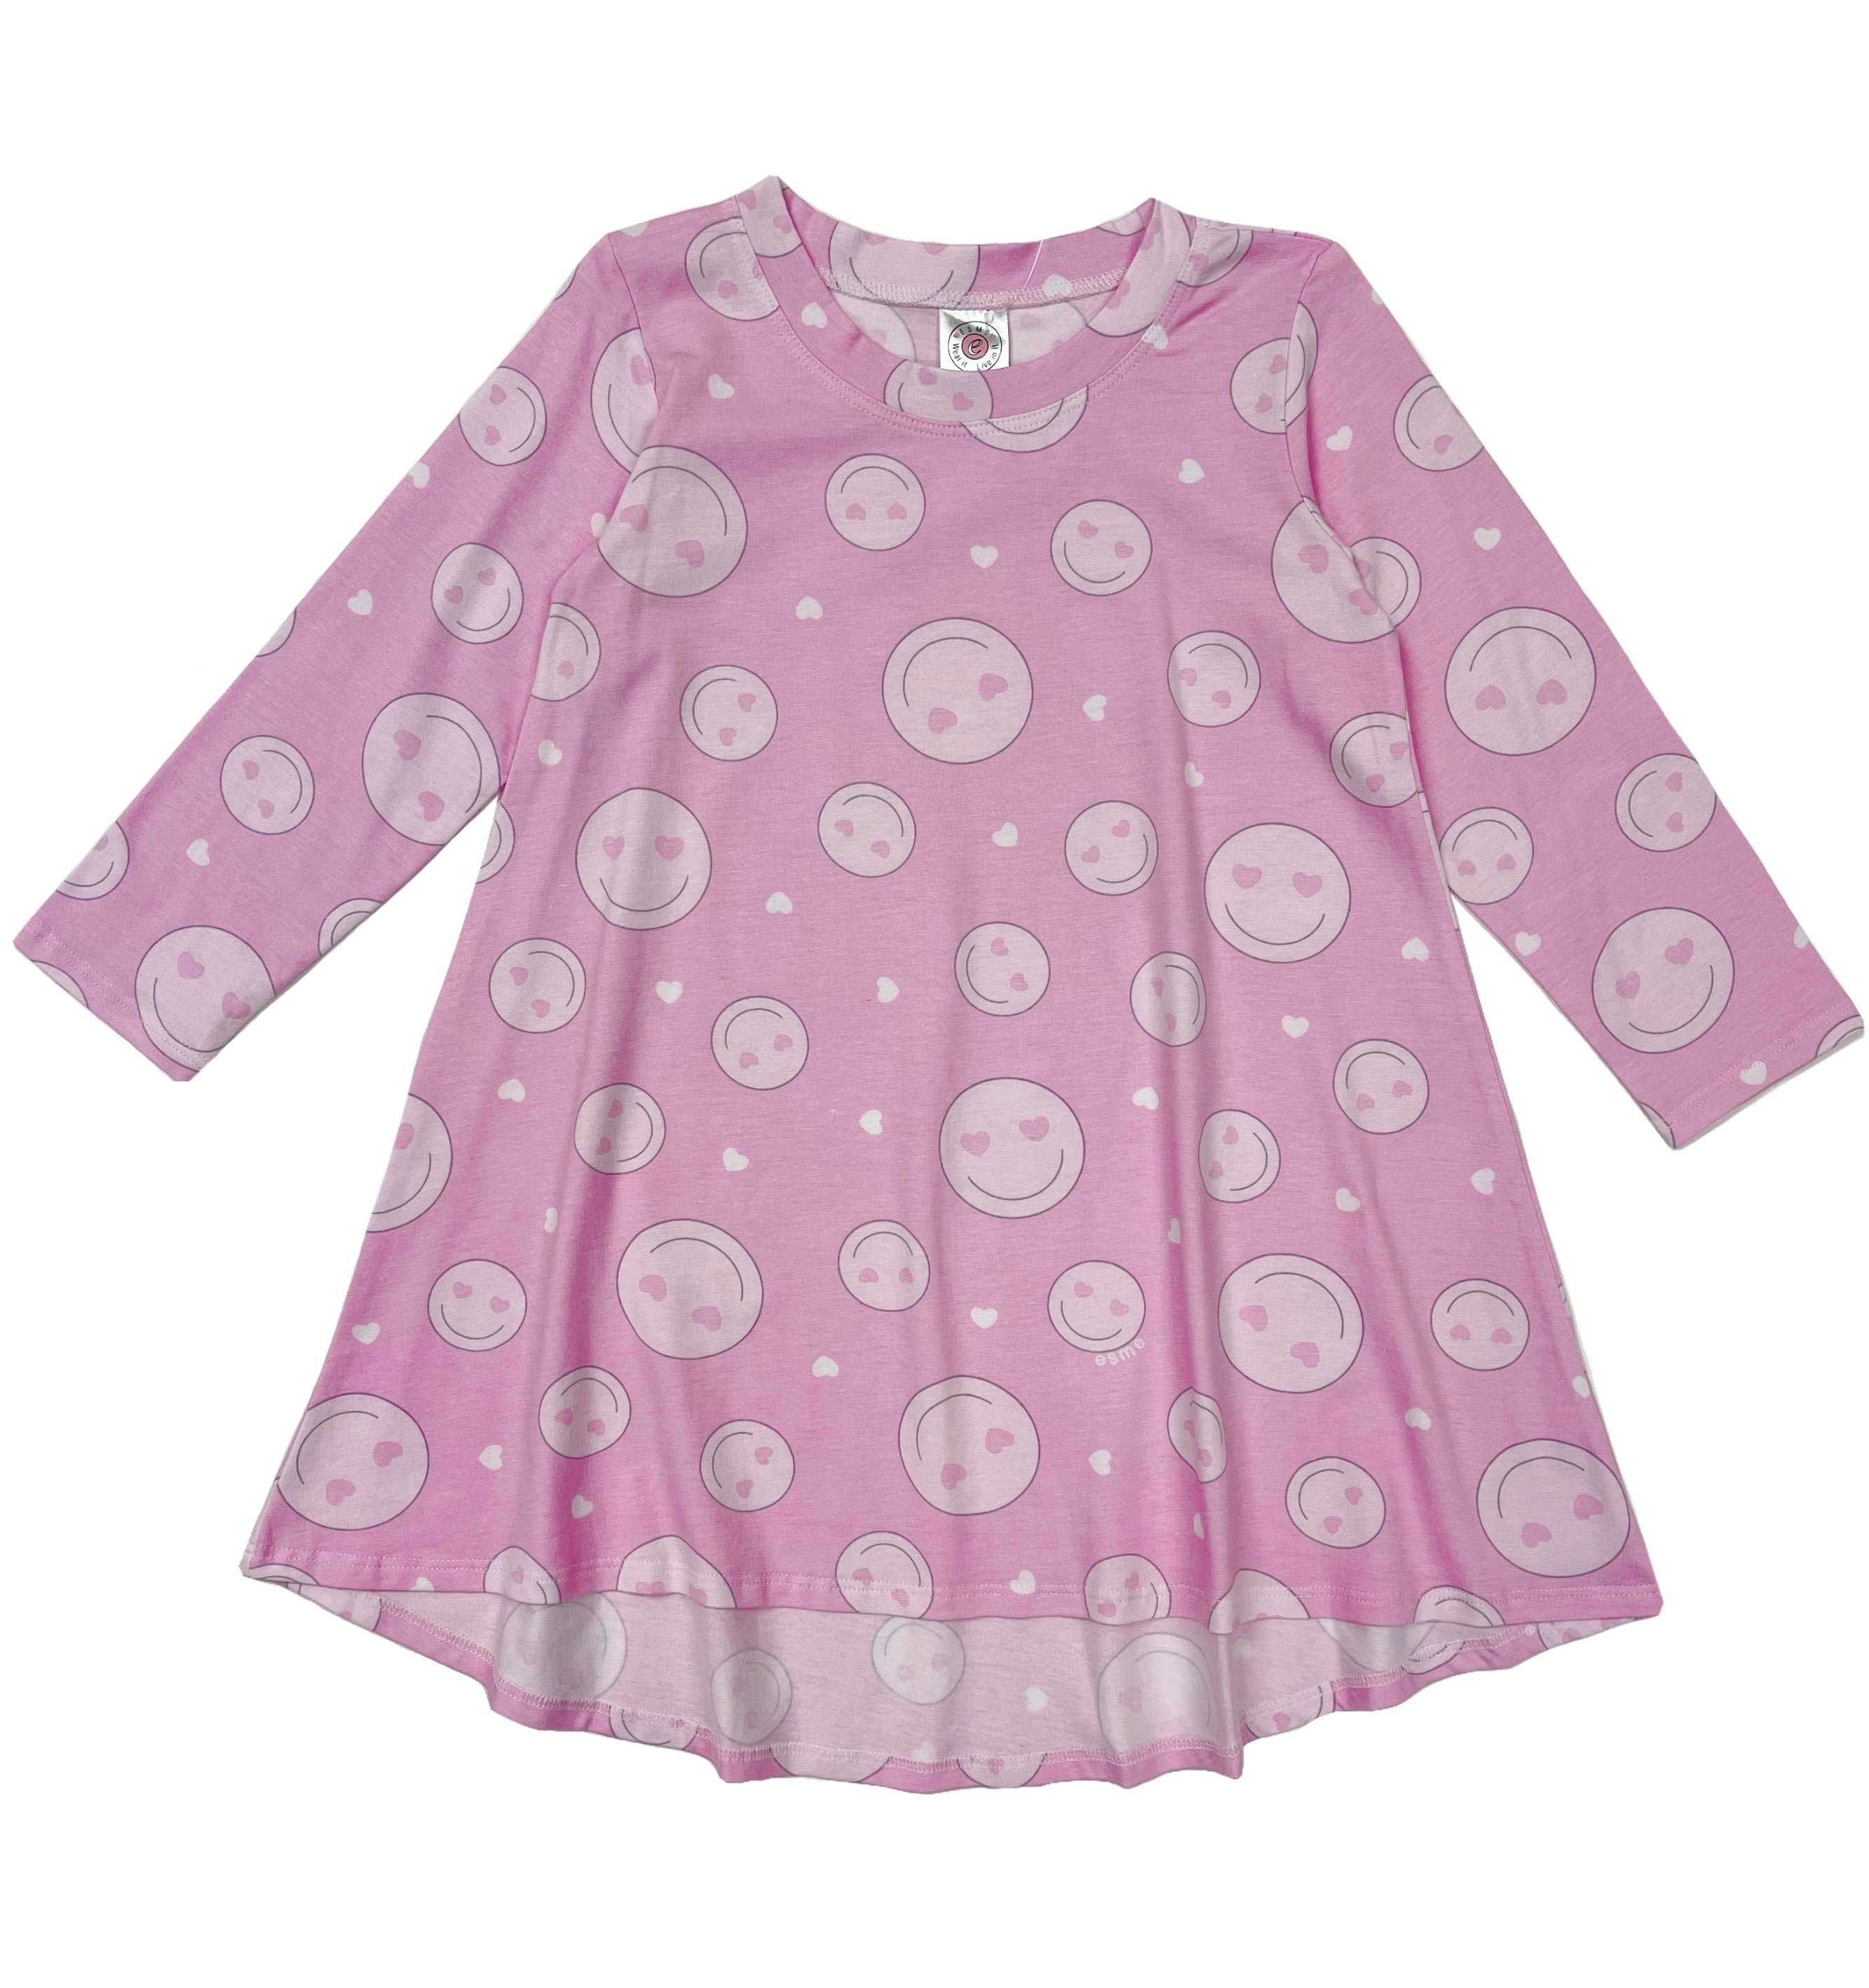 Esme Pink Smiley Hi-low Dress – Chic and Stylin